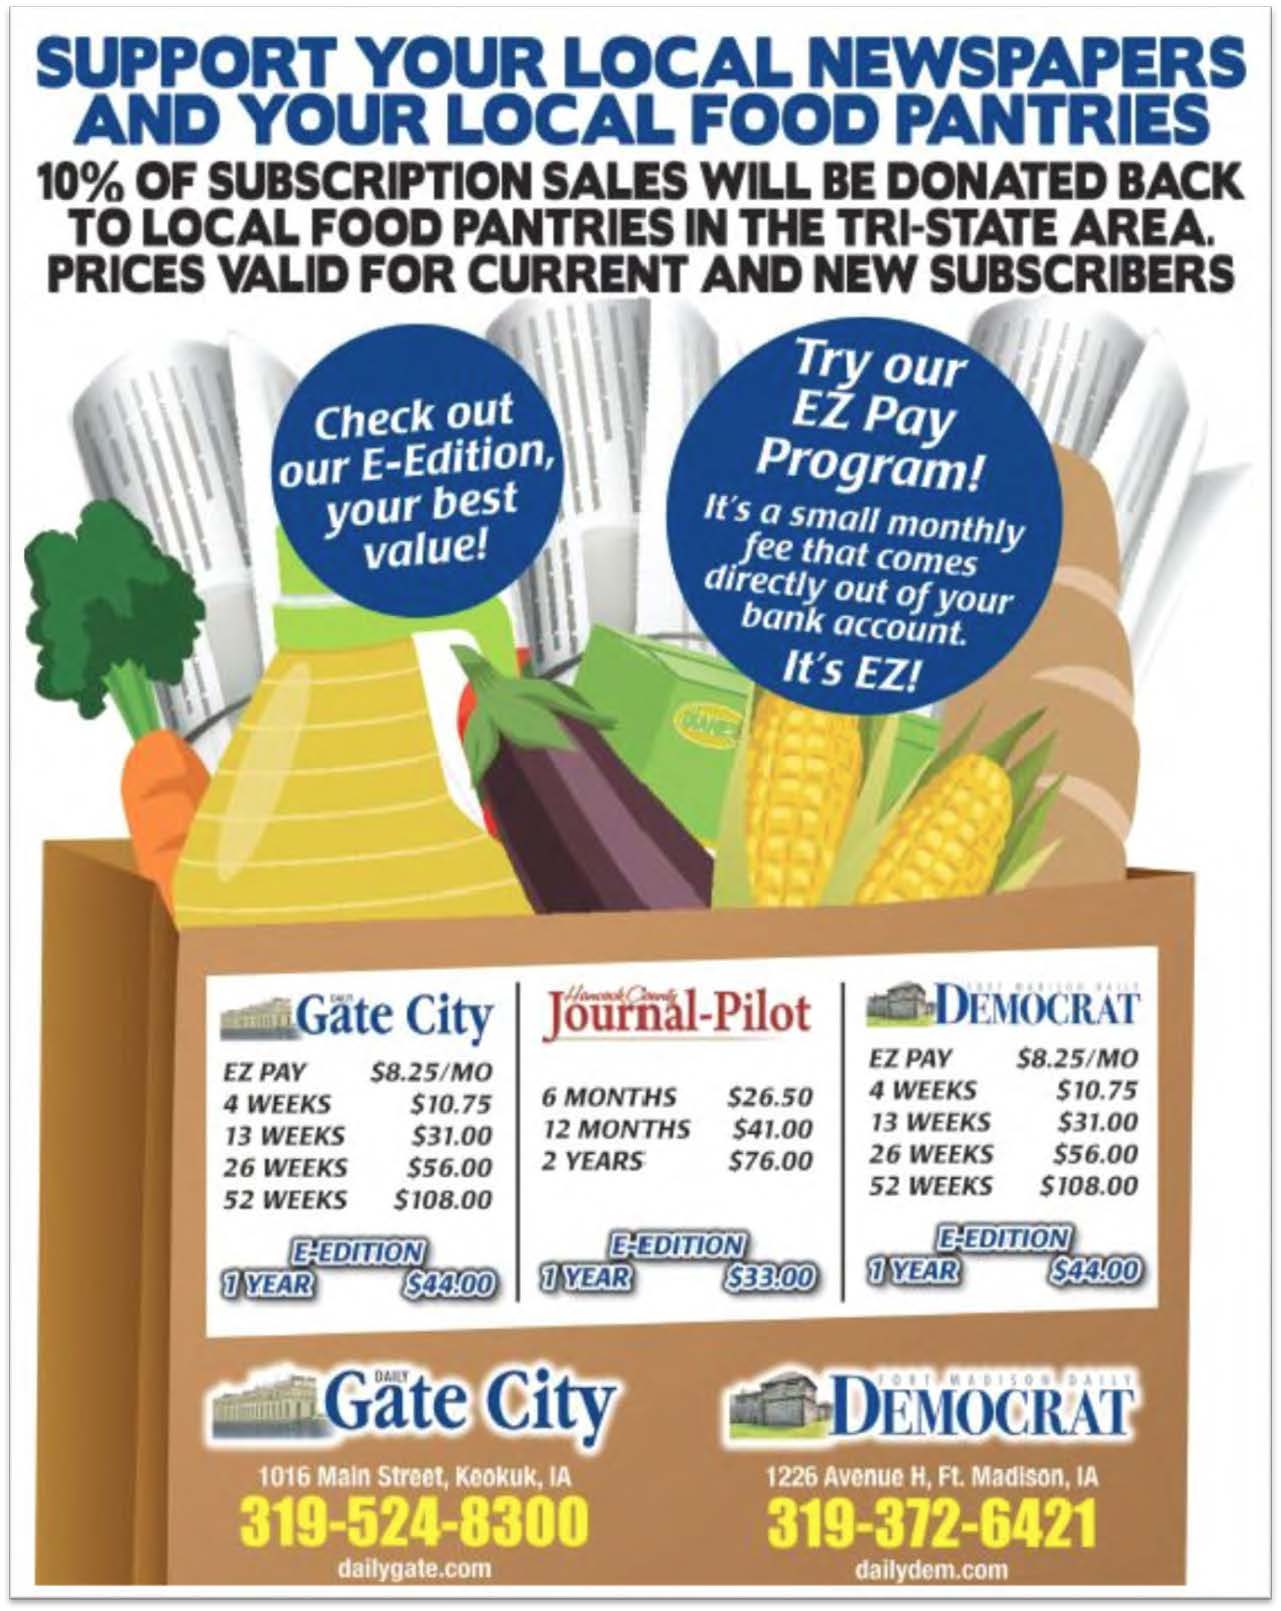 Idea #43 of 50 Days of Ideas! SUPPORT YOUR LOCAL NEWSPAPERS & LOCAL FOOD PANTRIES!